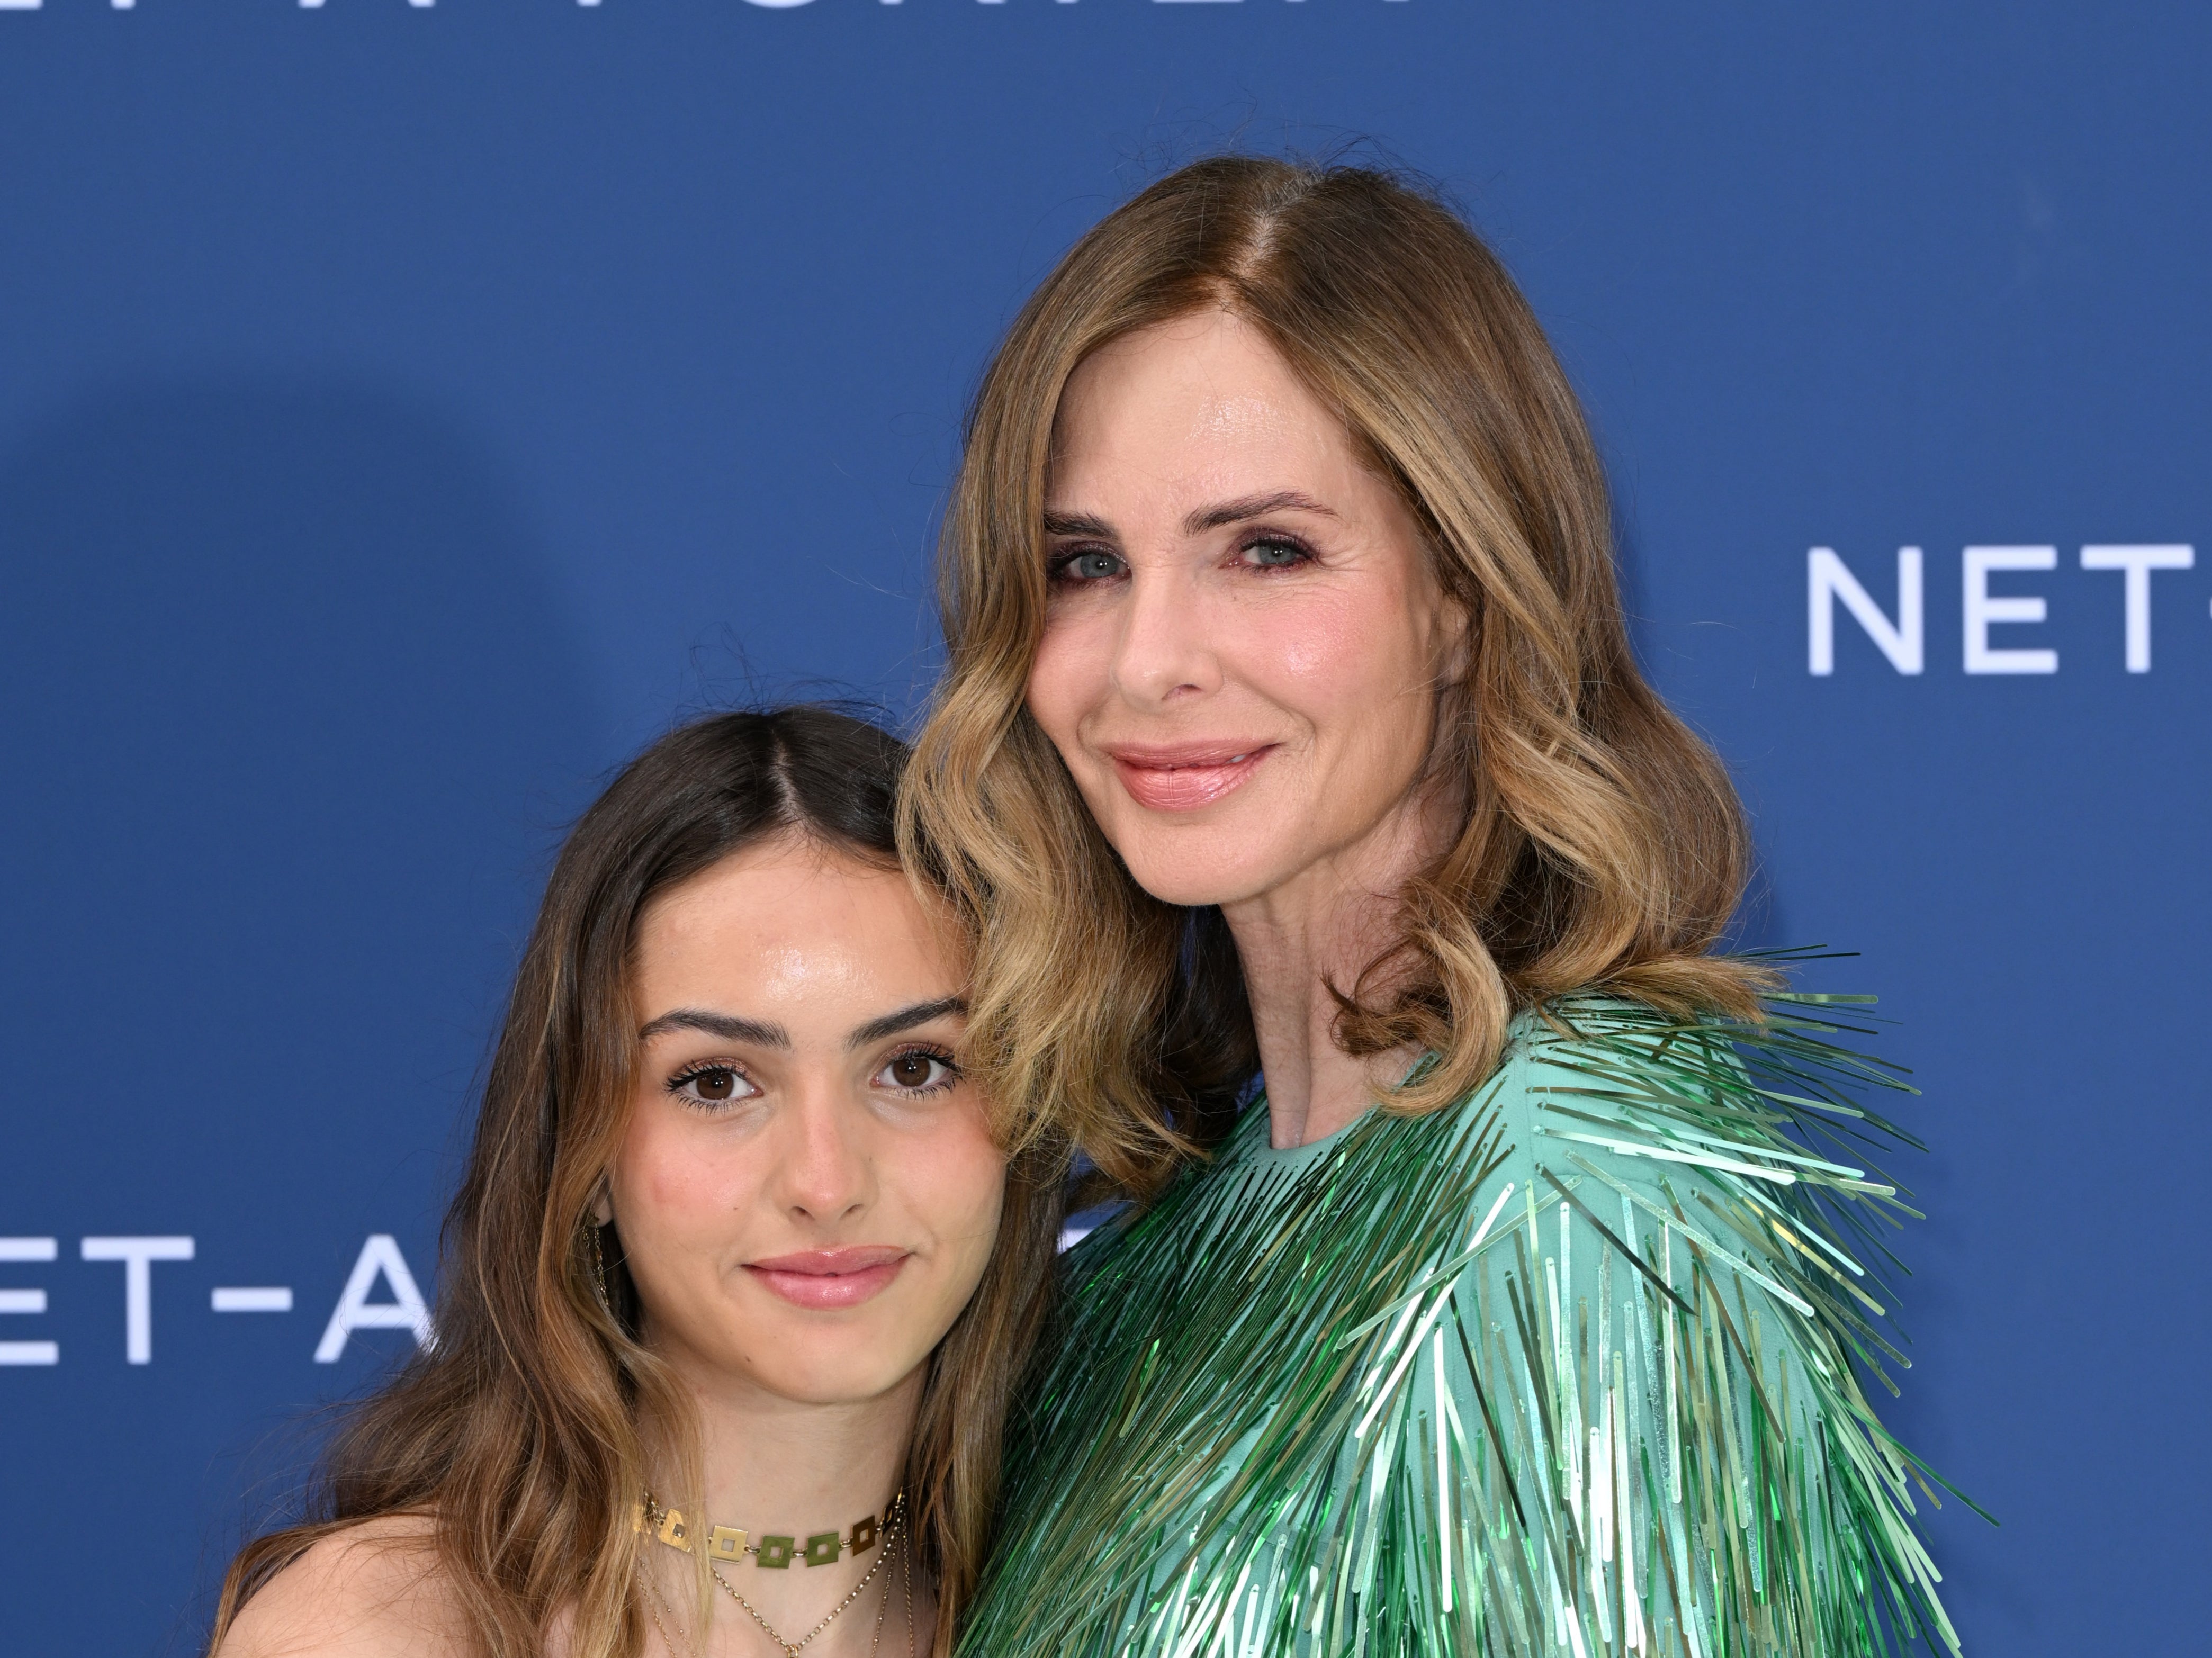 Trinny Woodall praises daughter Lyla for support in 'tough time' after  Charles Saatchi split